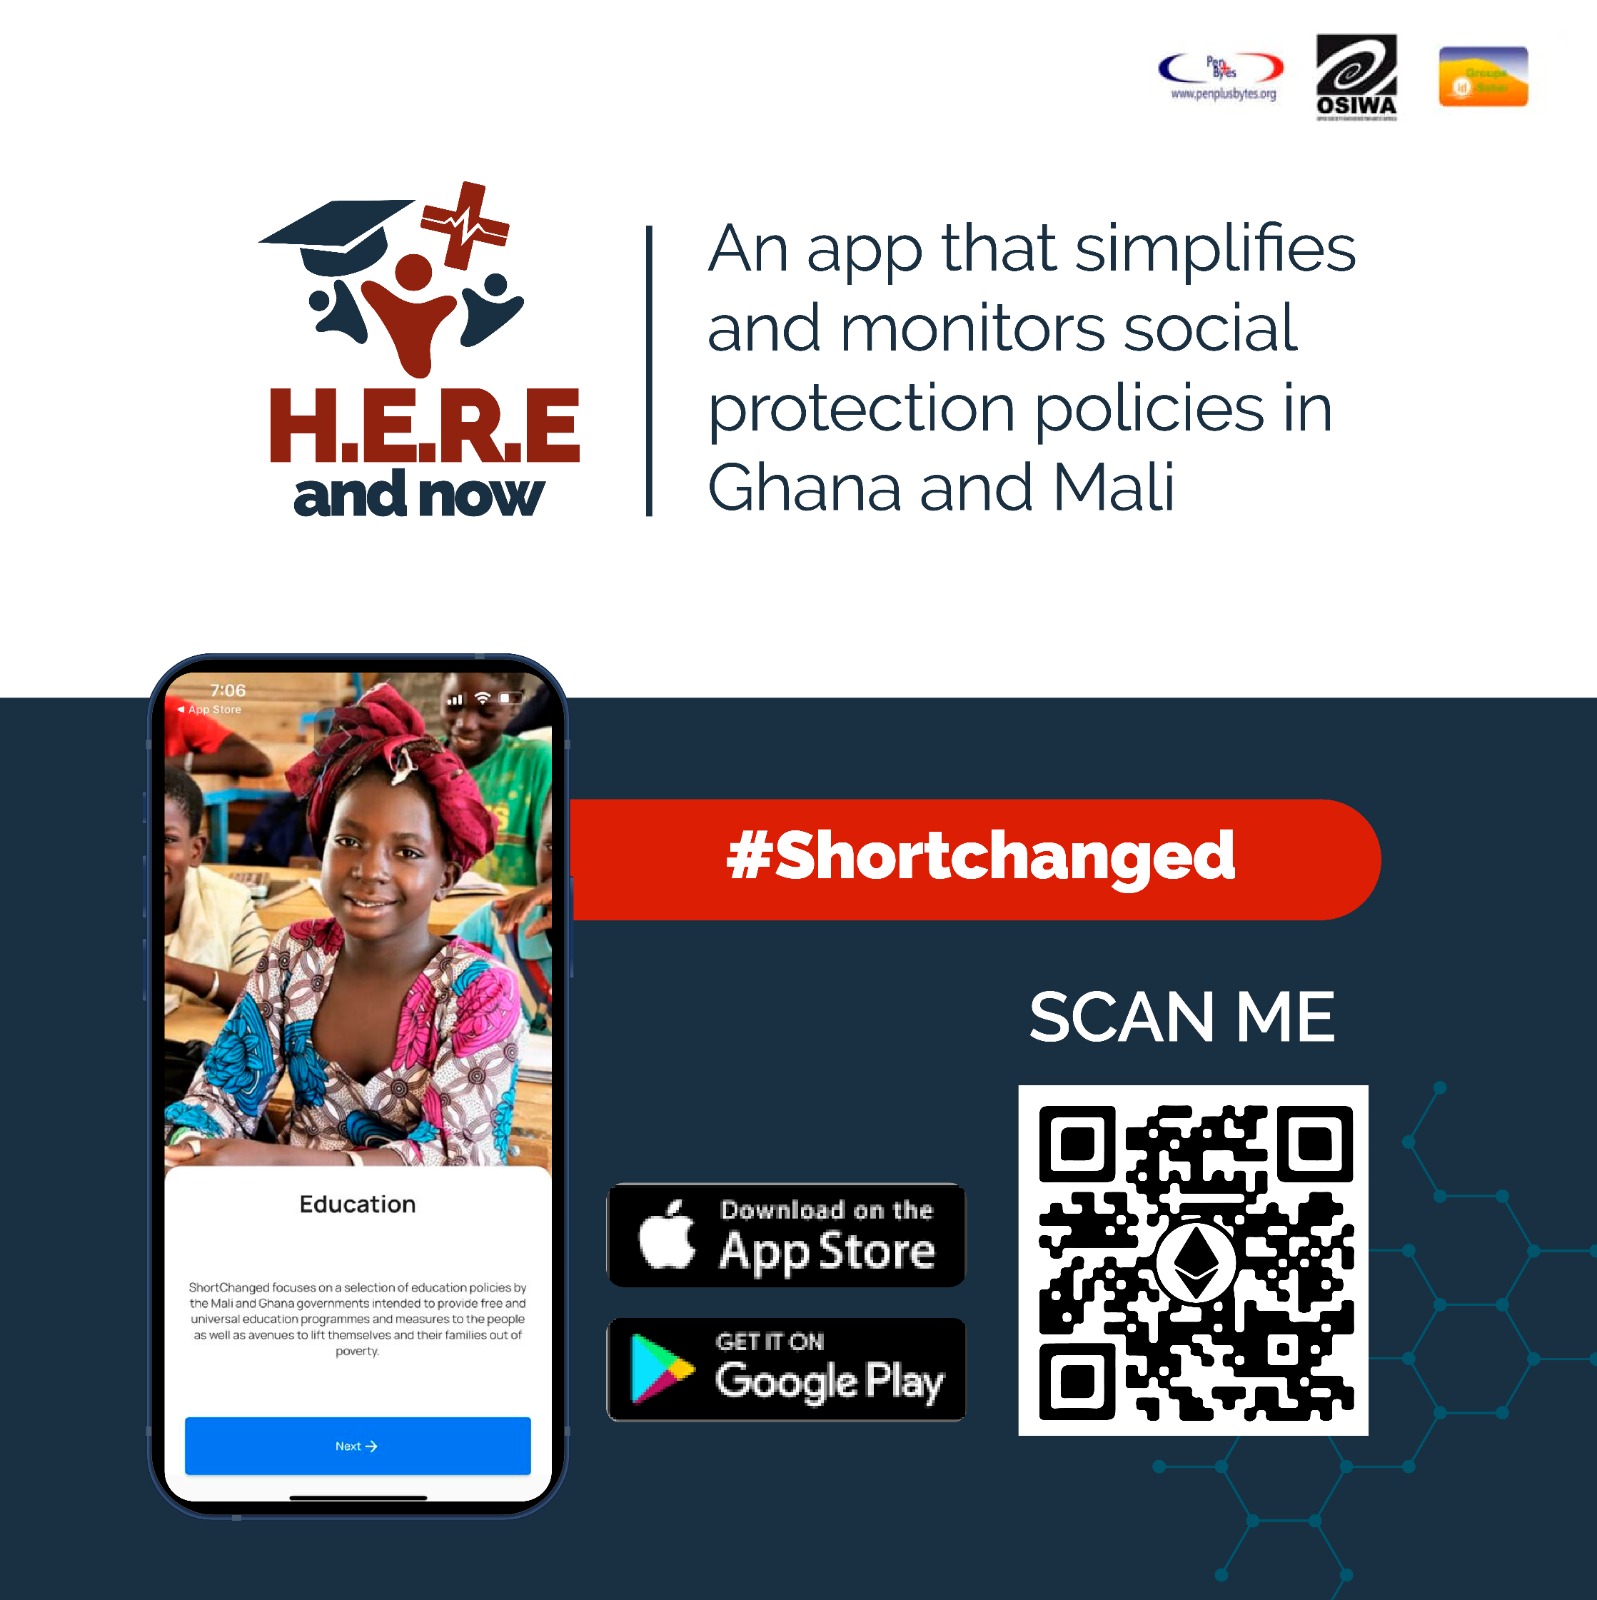 Penplusbytes Launches Shortchanged Mobile App to monitor Social Protection Policies